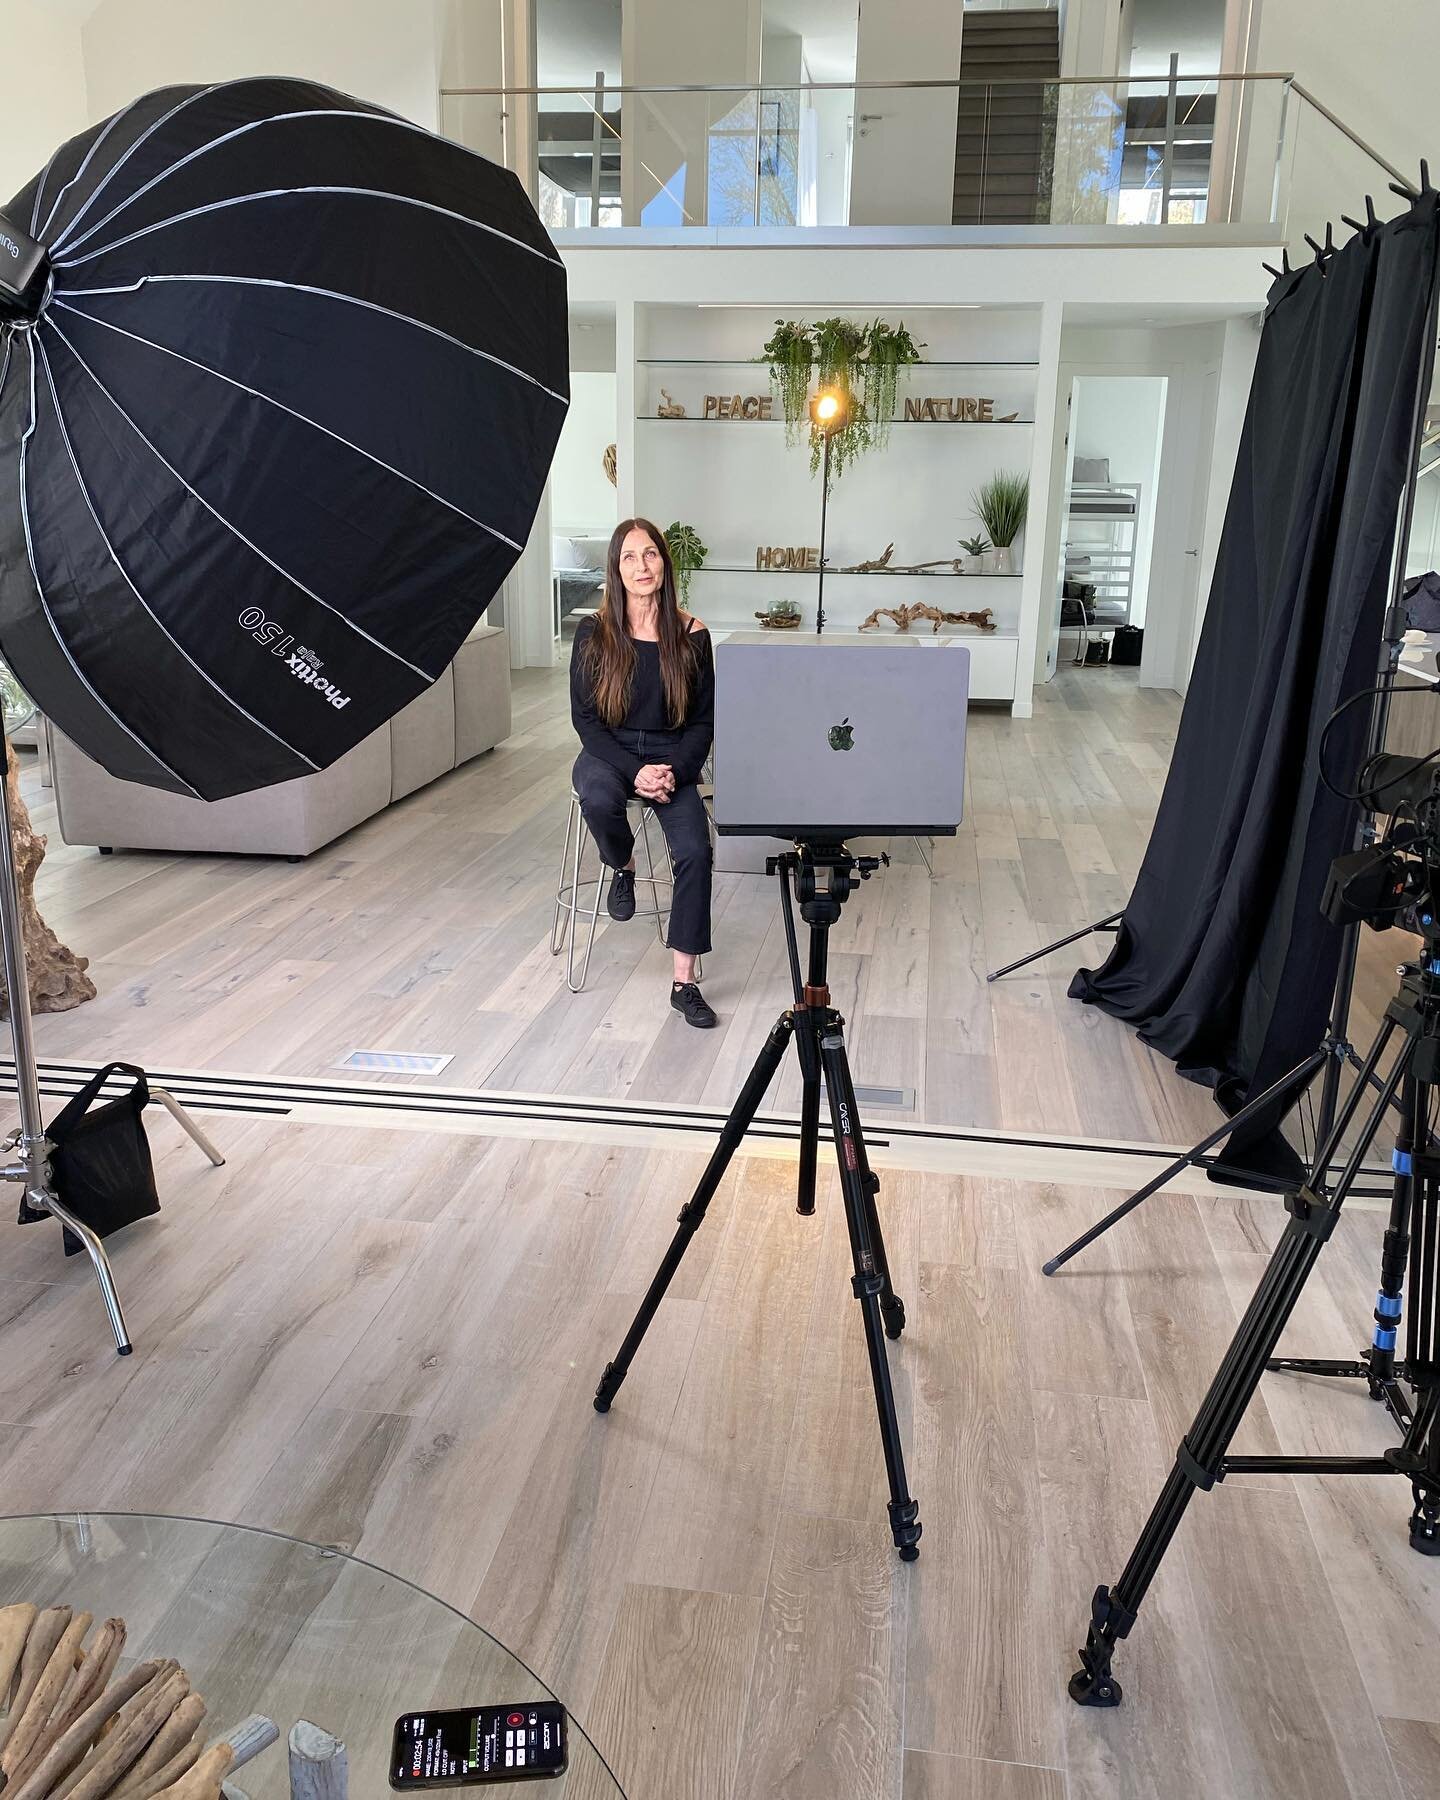 Something exciting happening at SOL HAUS today. Thank you Kebony for visiting  us and interviewing the design team. We loved sharing our story of creating this amazing home.. #kebony #kebonyclear #kebonyusa #scandinaviandesign #sustainablehome #dwell